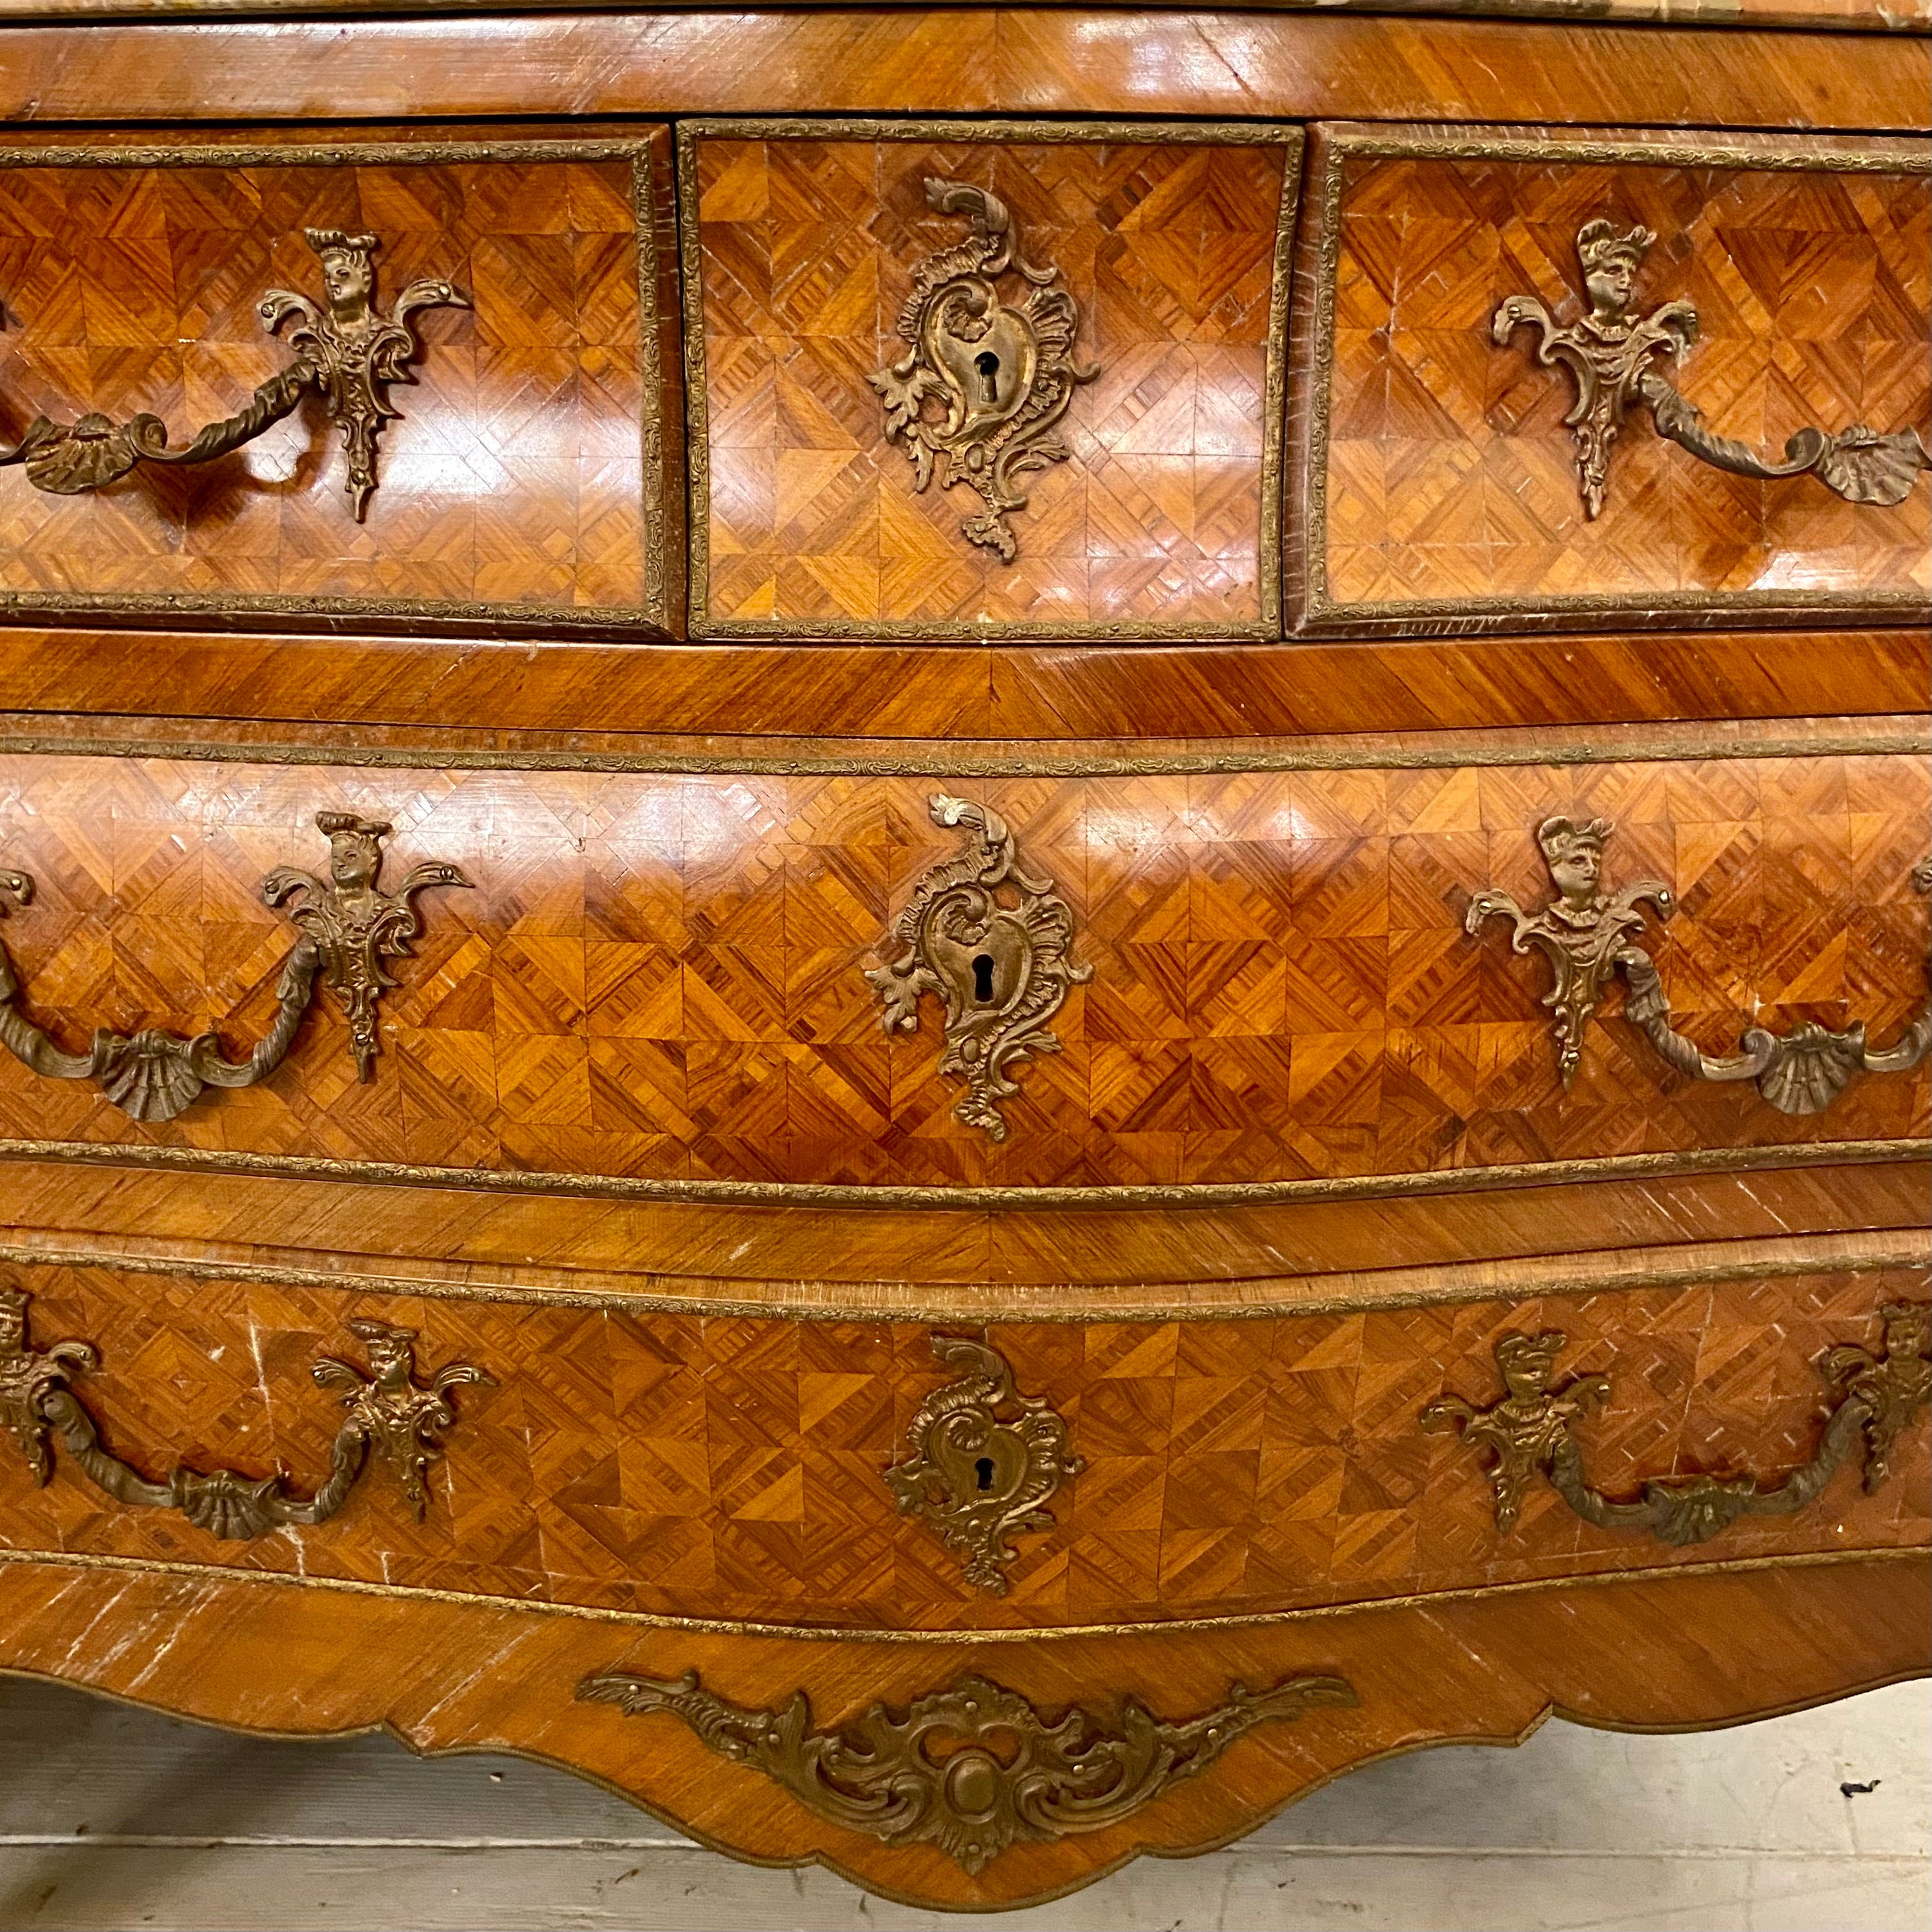 Incredible Antique Italian Bombe Chest with Inlaid Details and Ornate Castings